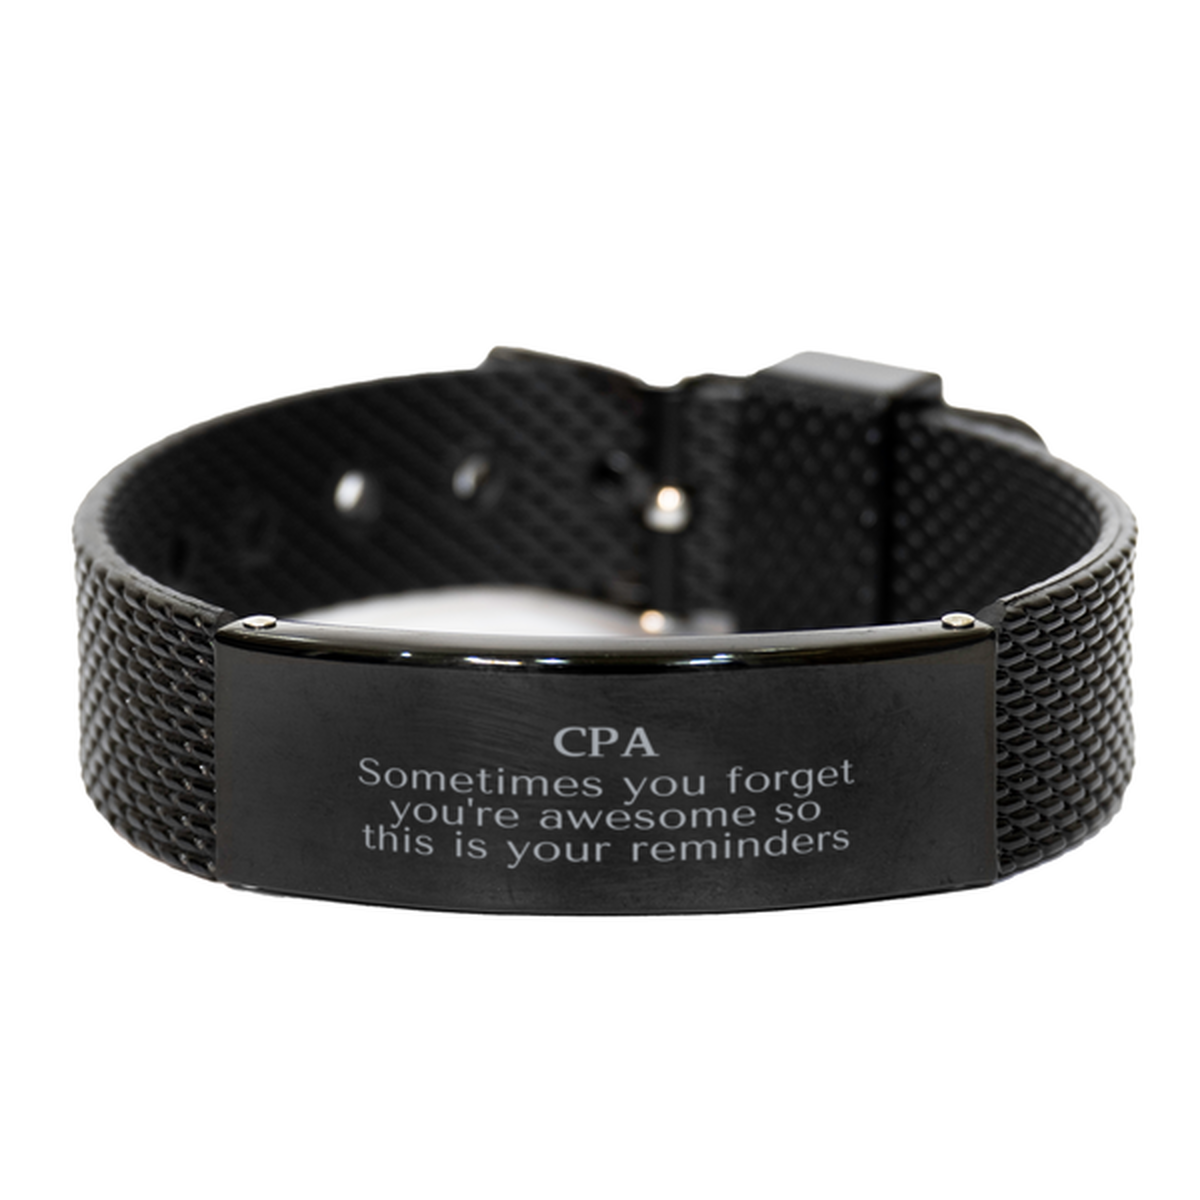 Sentimental CPA Black Shark Mesh Bracelet, CPA Sometimes you forget you're awesome so this is your reminders, Graduation Christmas Birthday Gifts for CPA, Men, Women, Coworkers